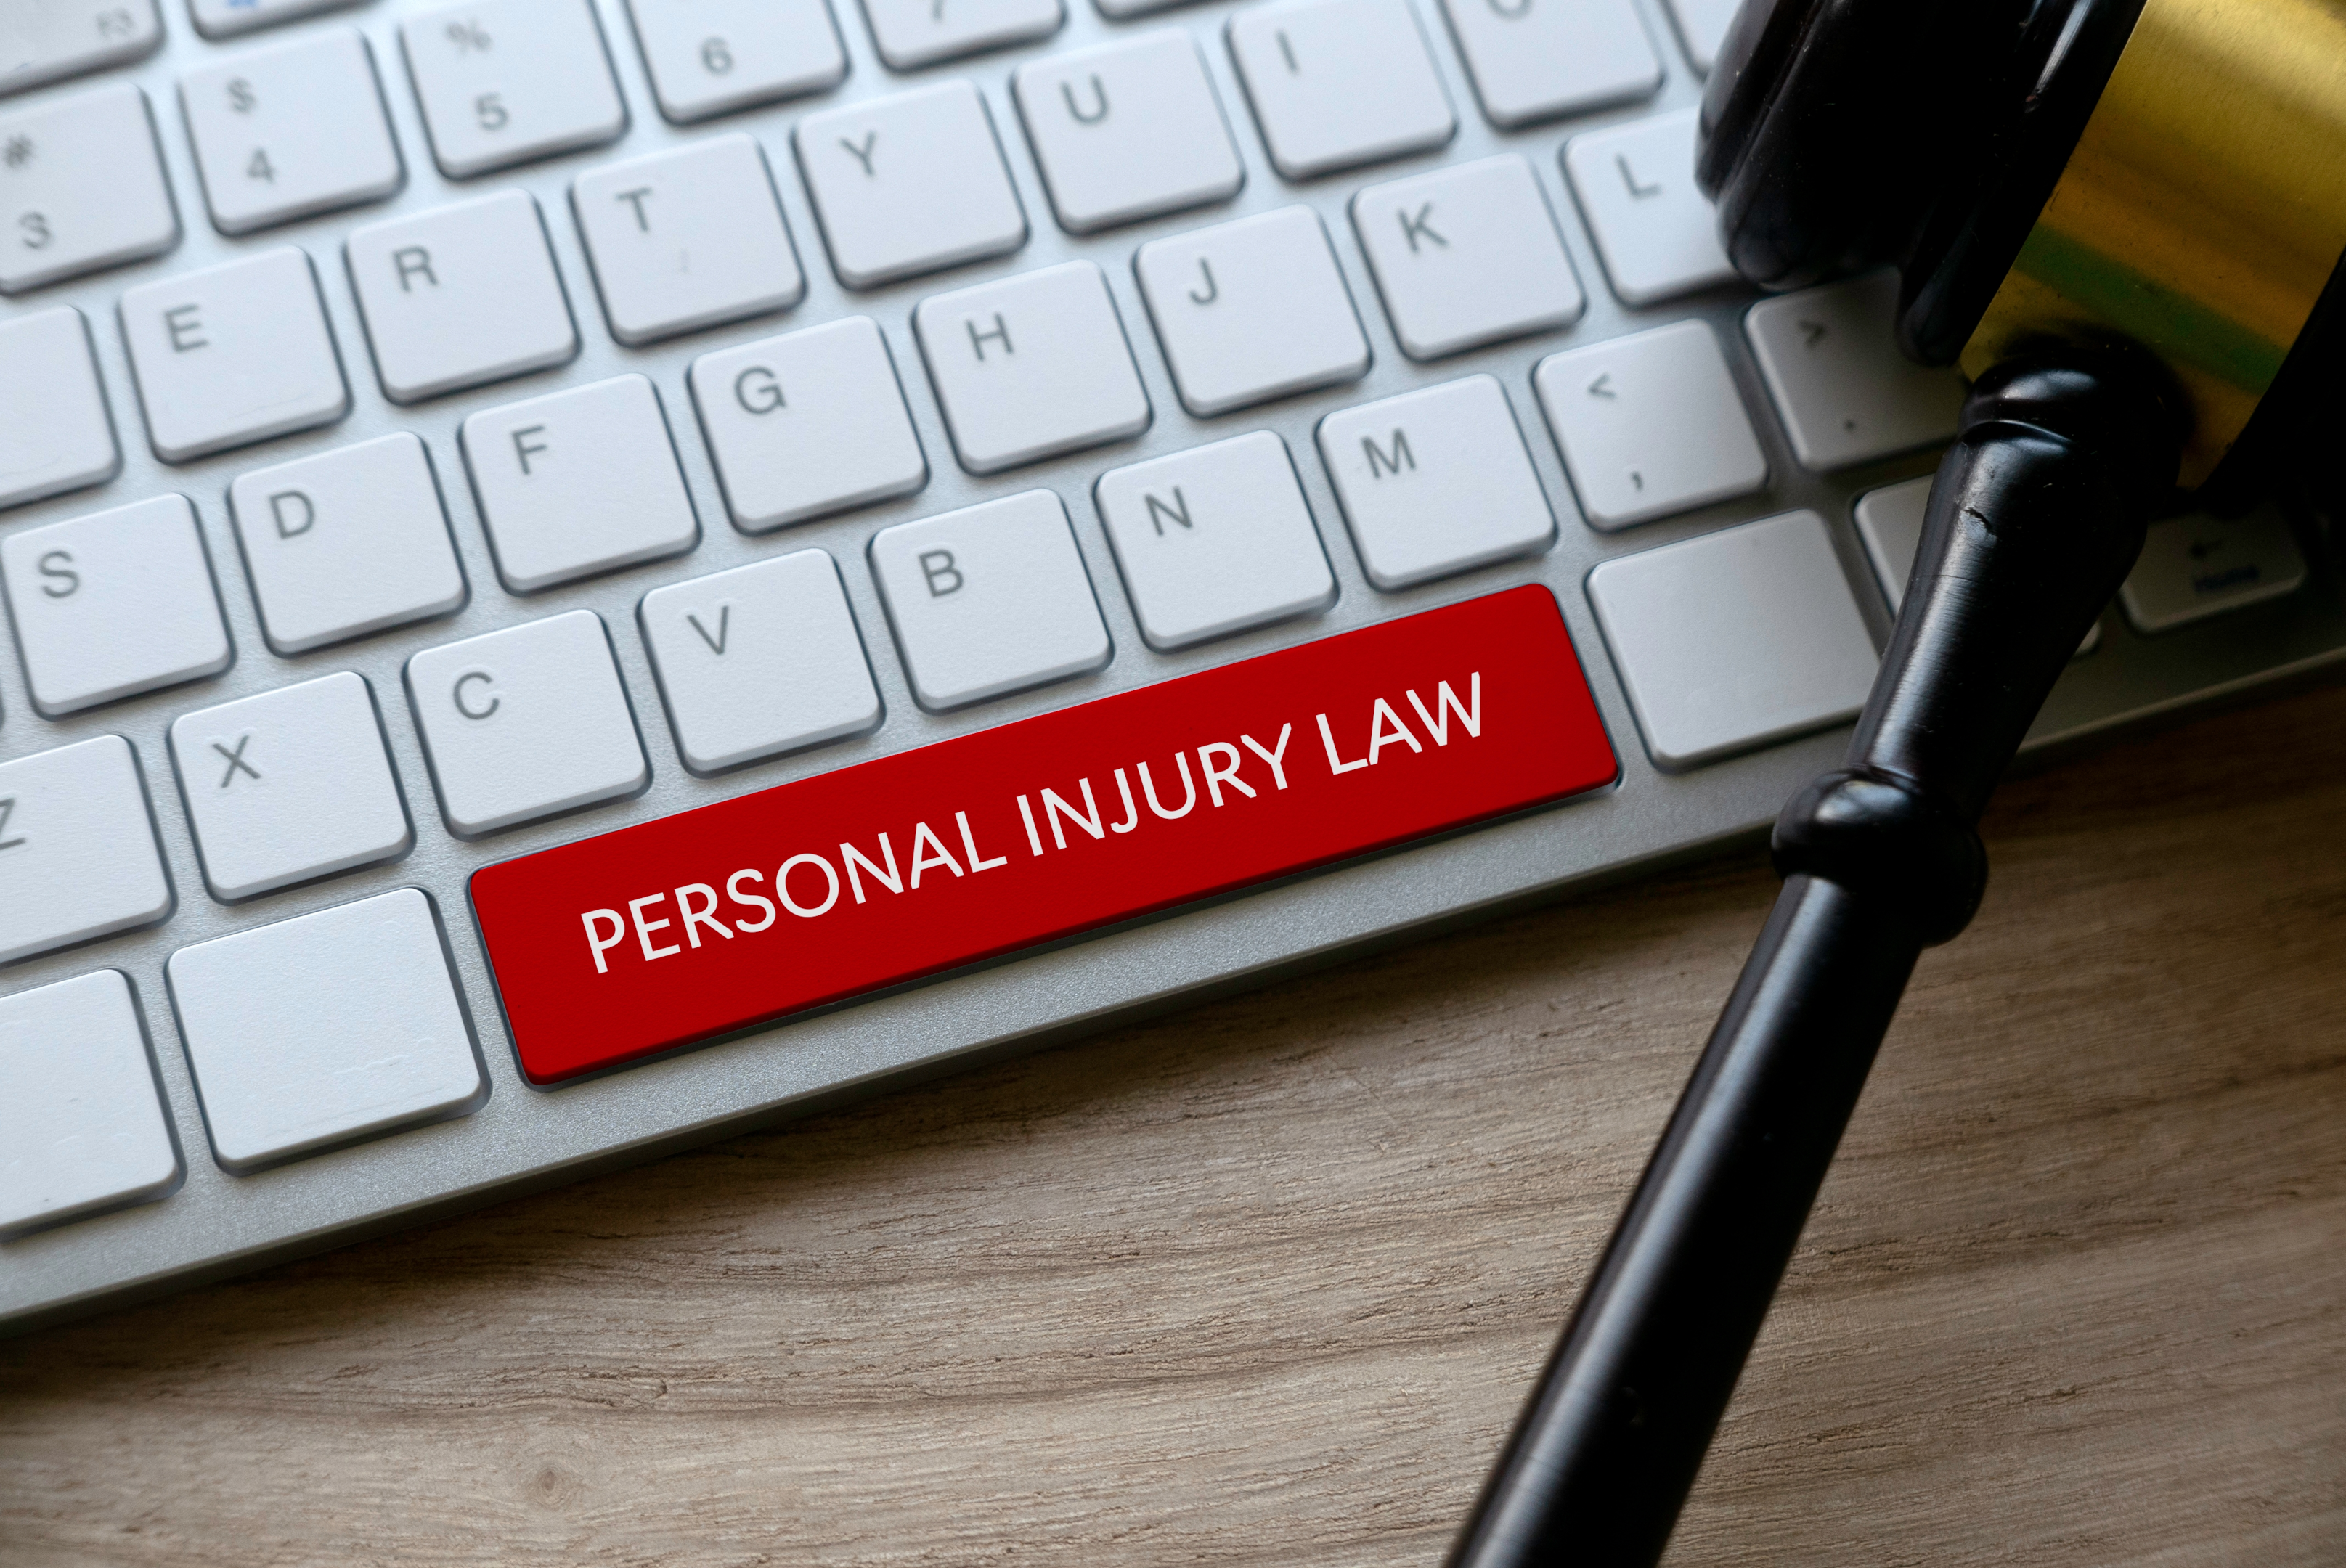 Seek a personal injury lawyer for expertise in workplace incidents and compensation claims.